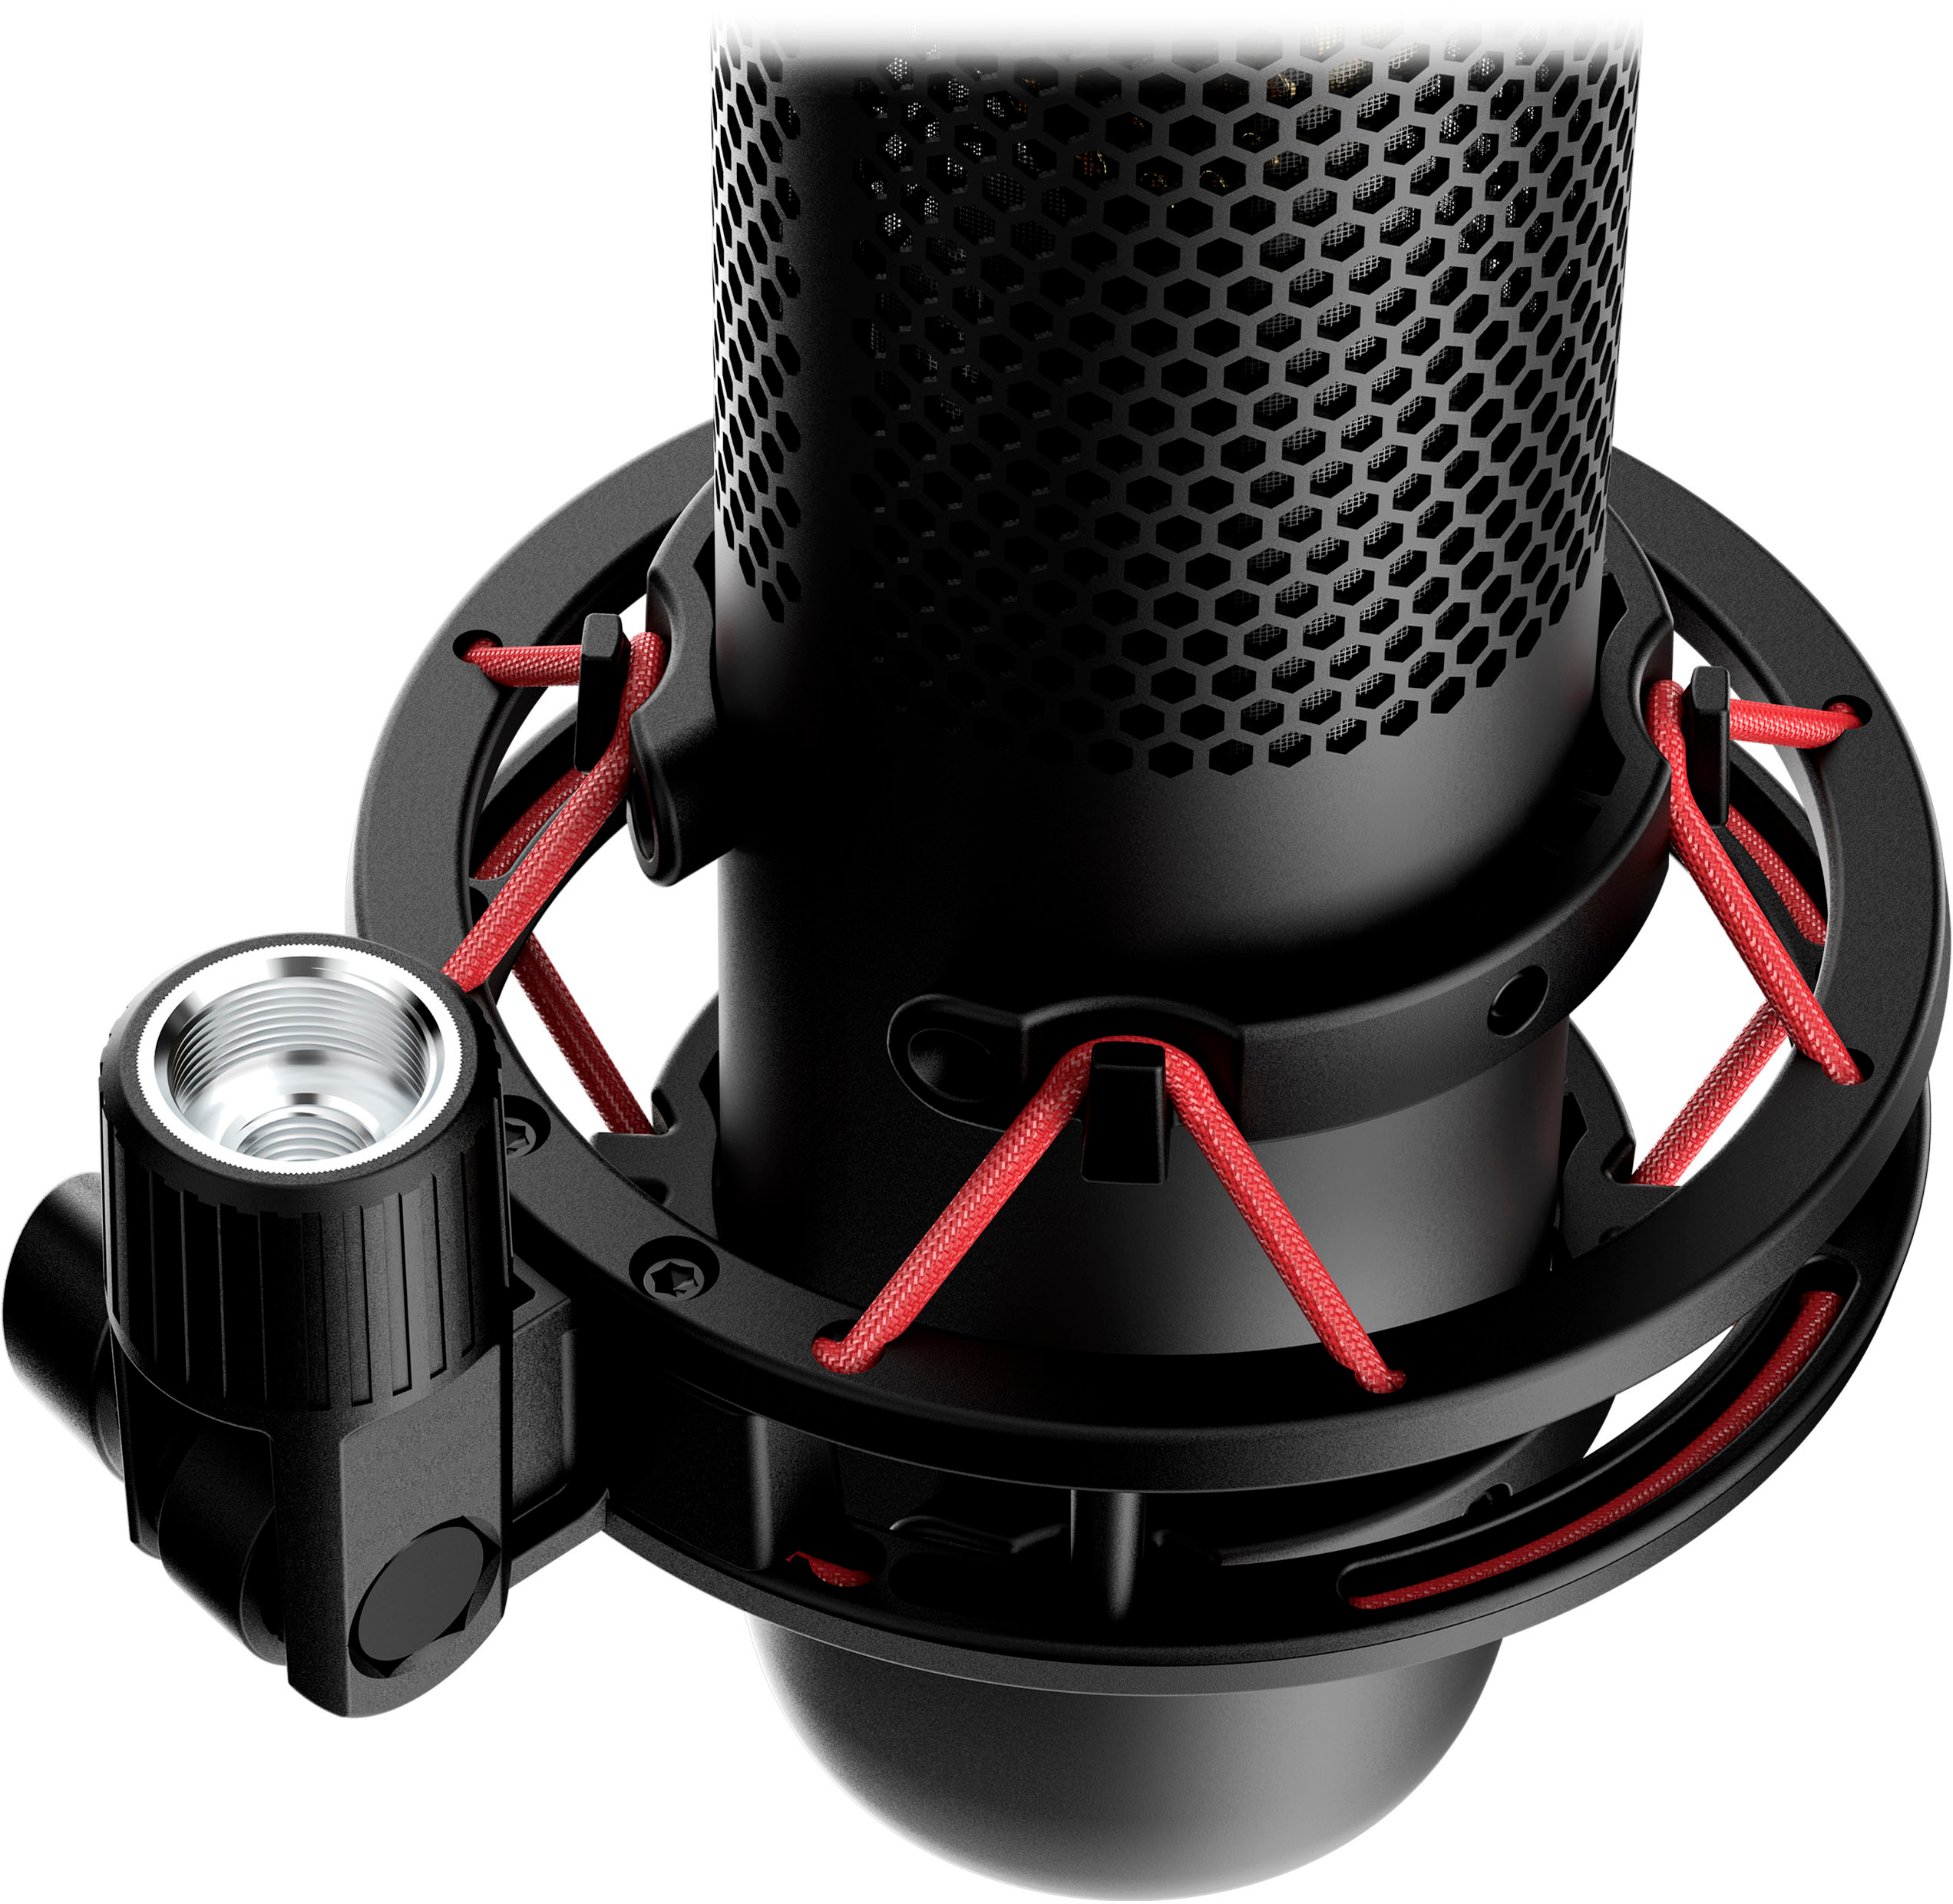 HyperX Procast Microphone Review